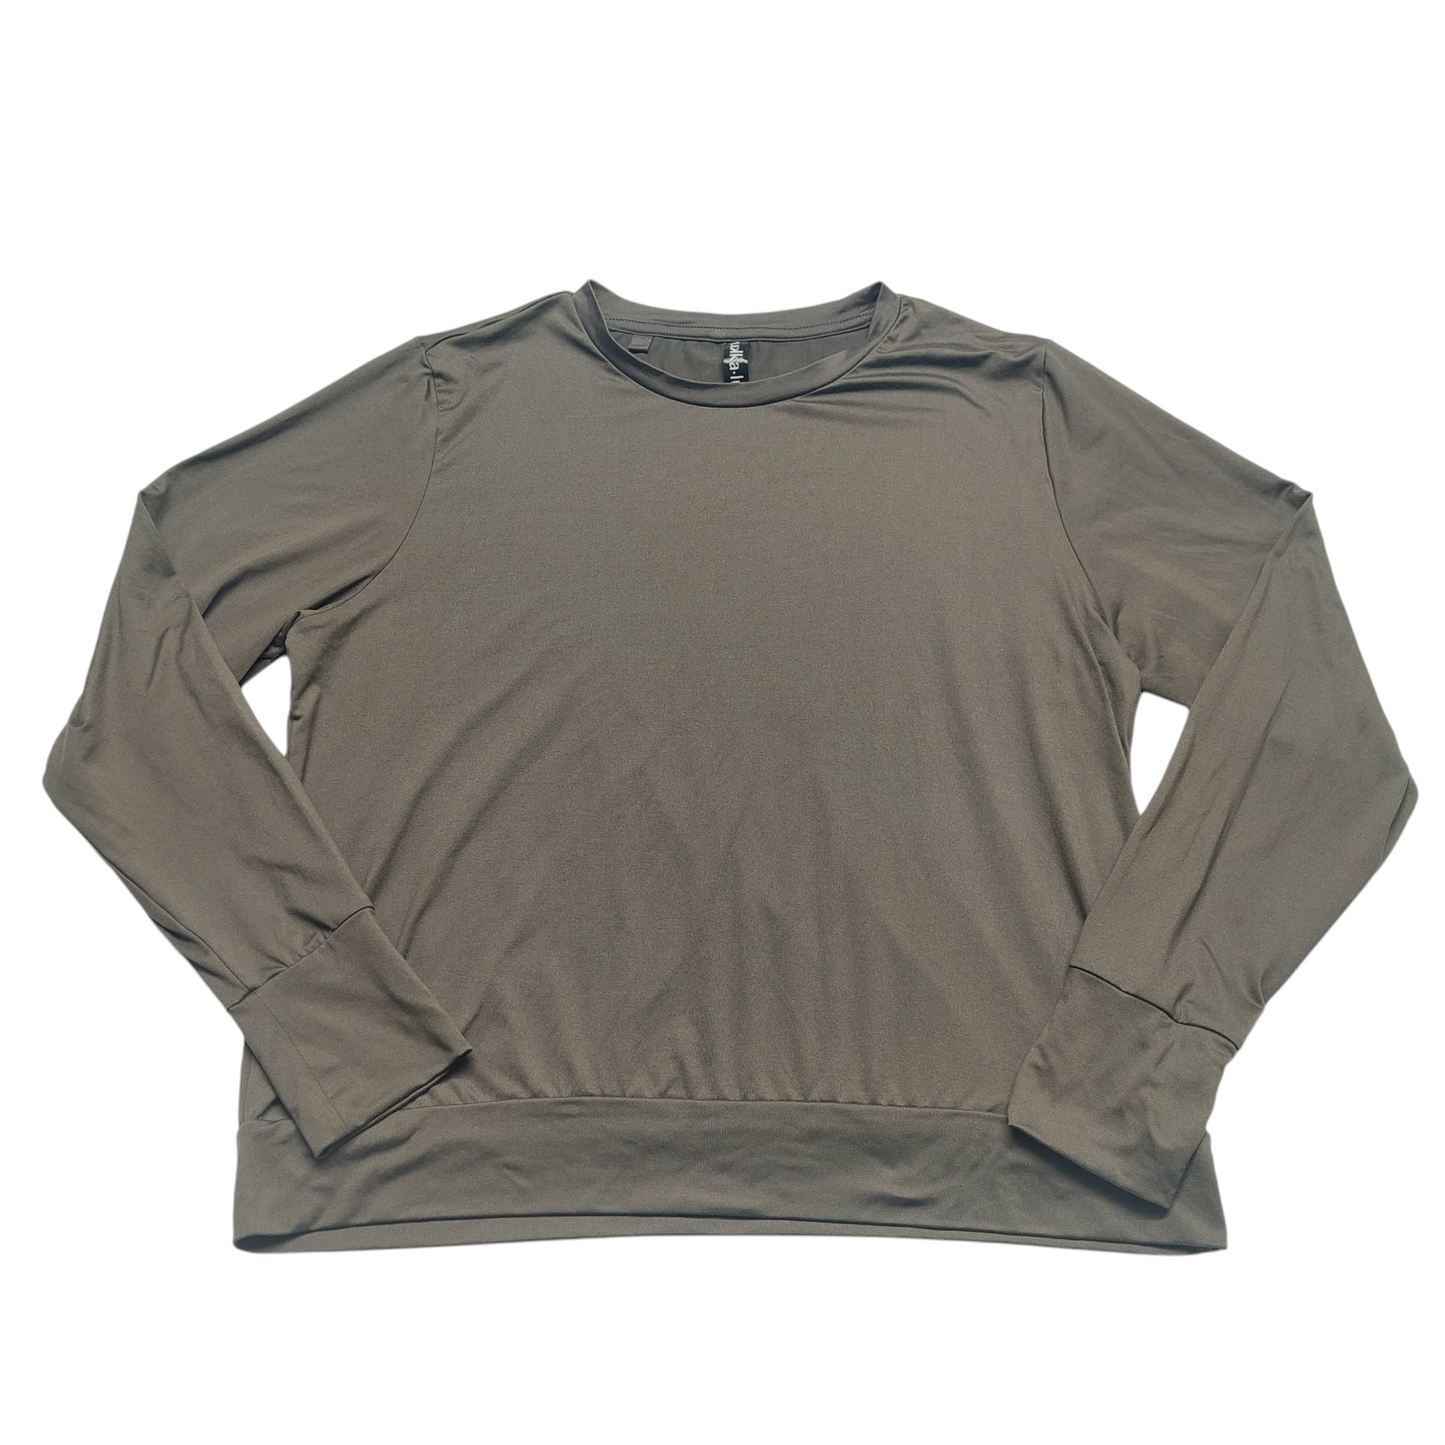 Athletic Top Long Sleeve Crewneck By Lukka  Size: L